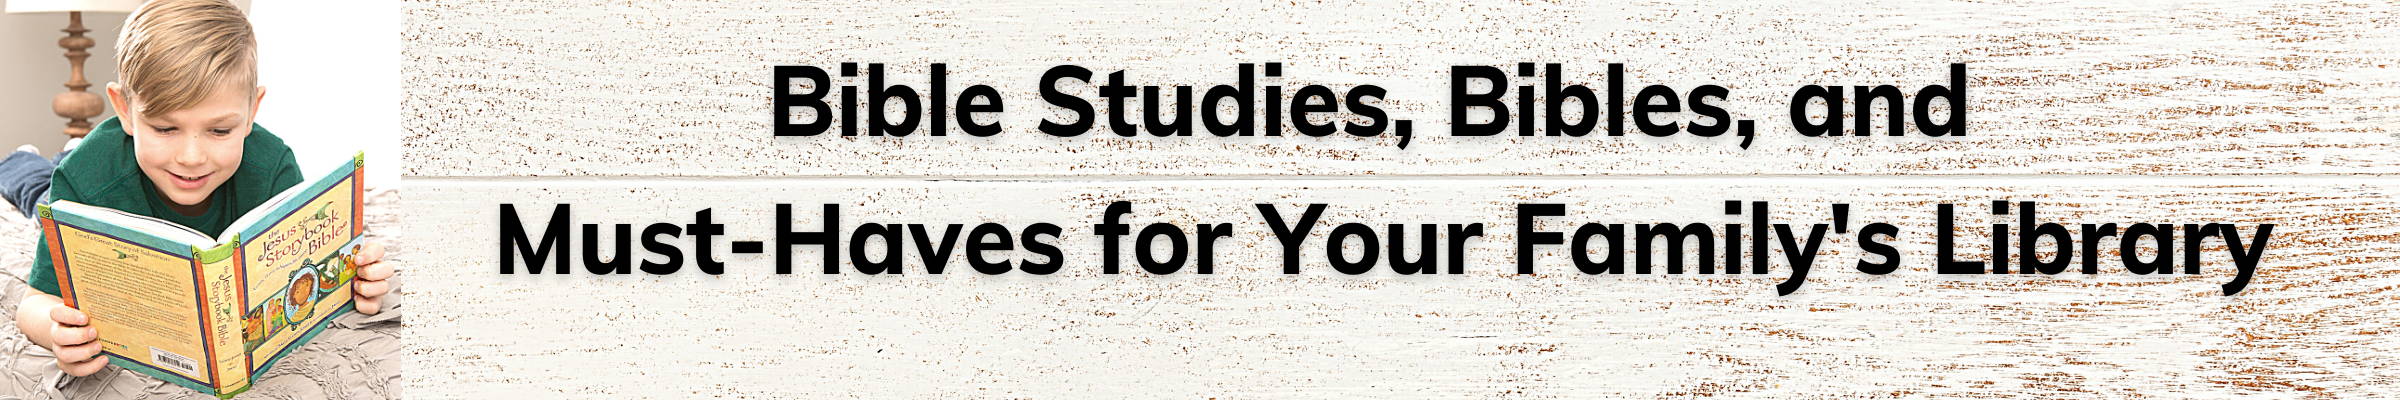 Bible Studies, Bibles, and  Must-Haves for Your Family's Library